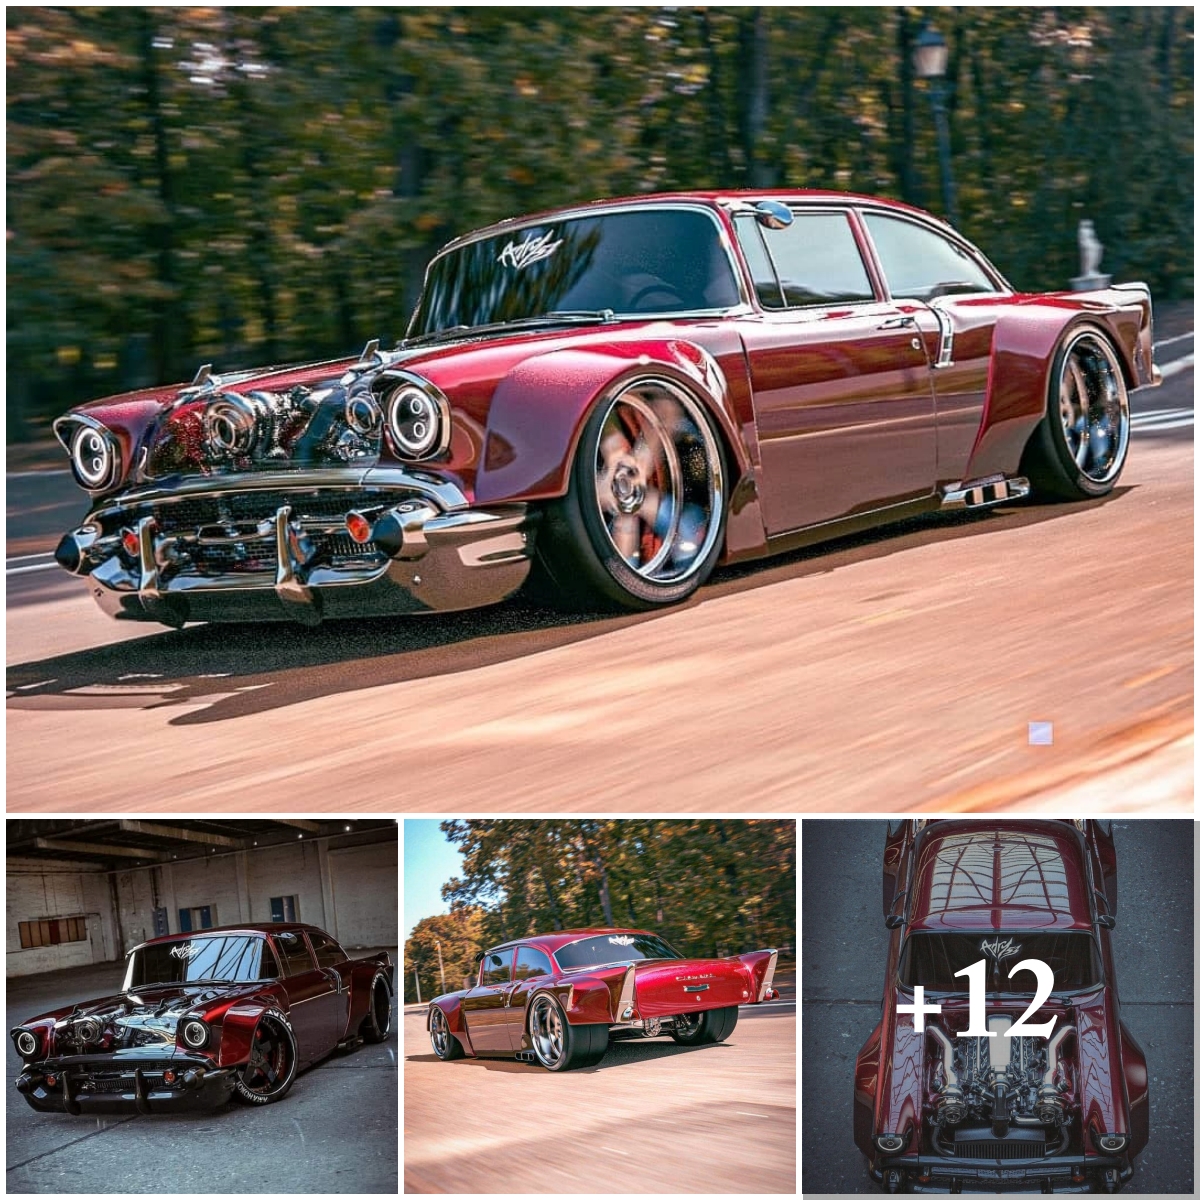 The Bold Transformation: Widebody 1957 Chevy 150 by Timothy Adry